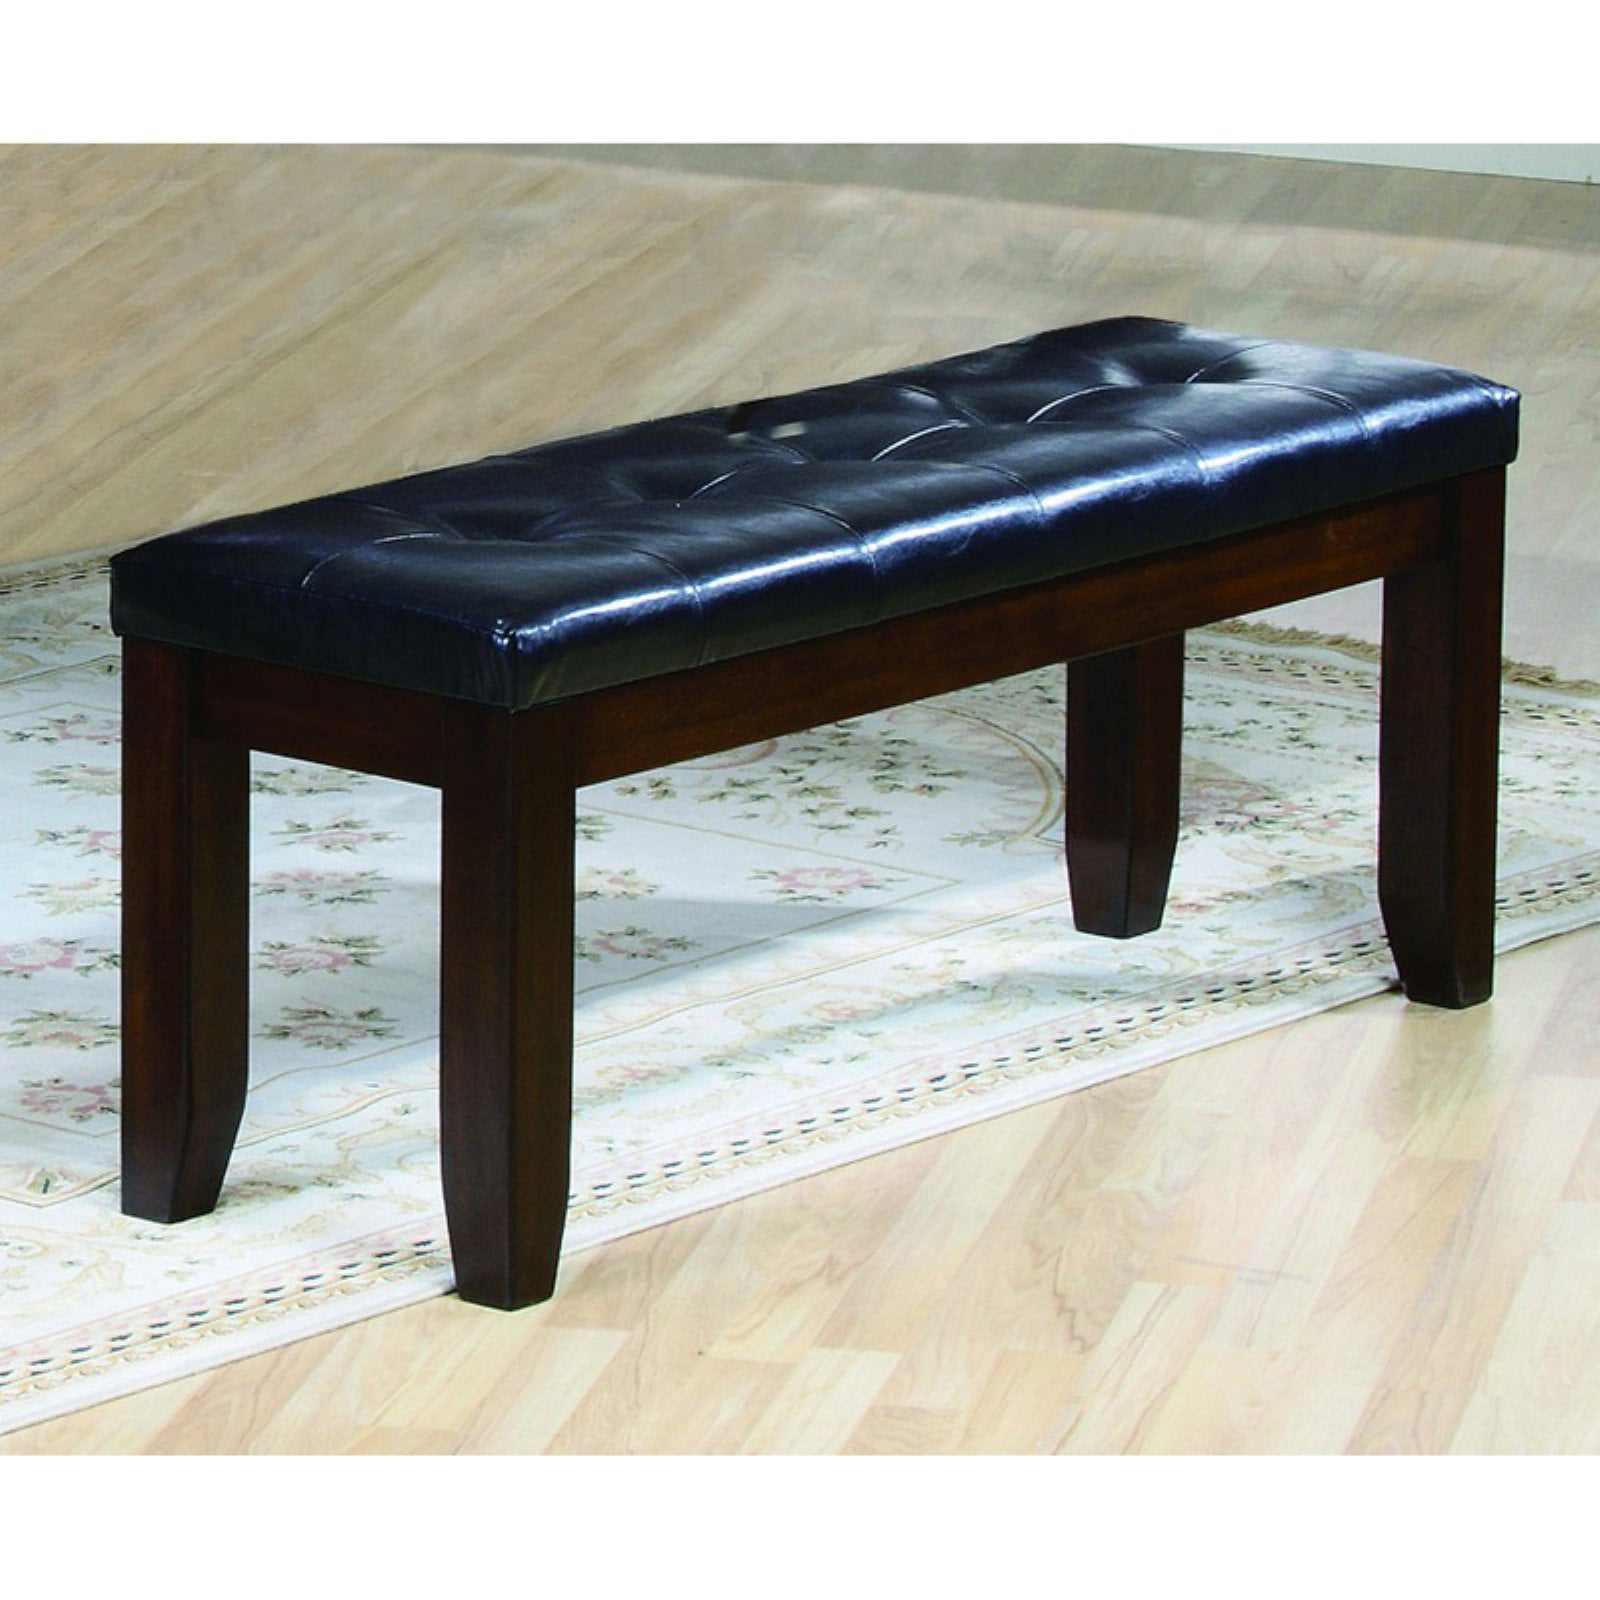 Picture of Benzara BM157897 Impressive Leather Tufted Upholstered Bench, Black & Brown